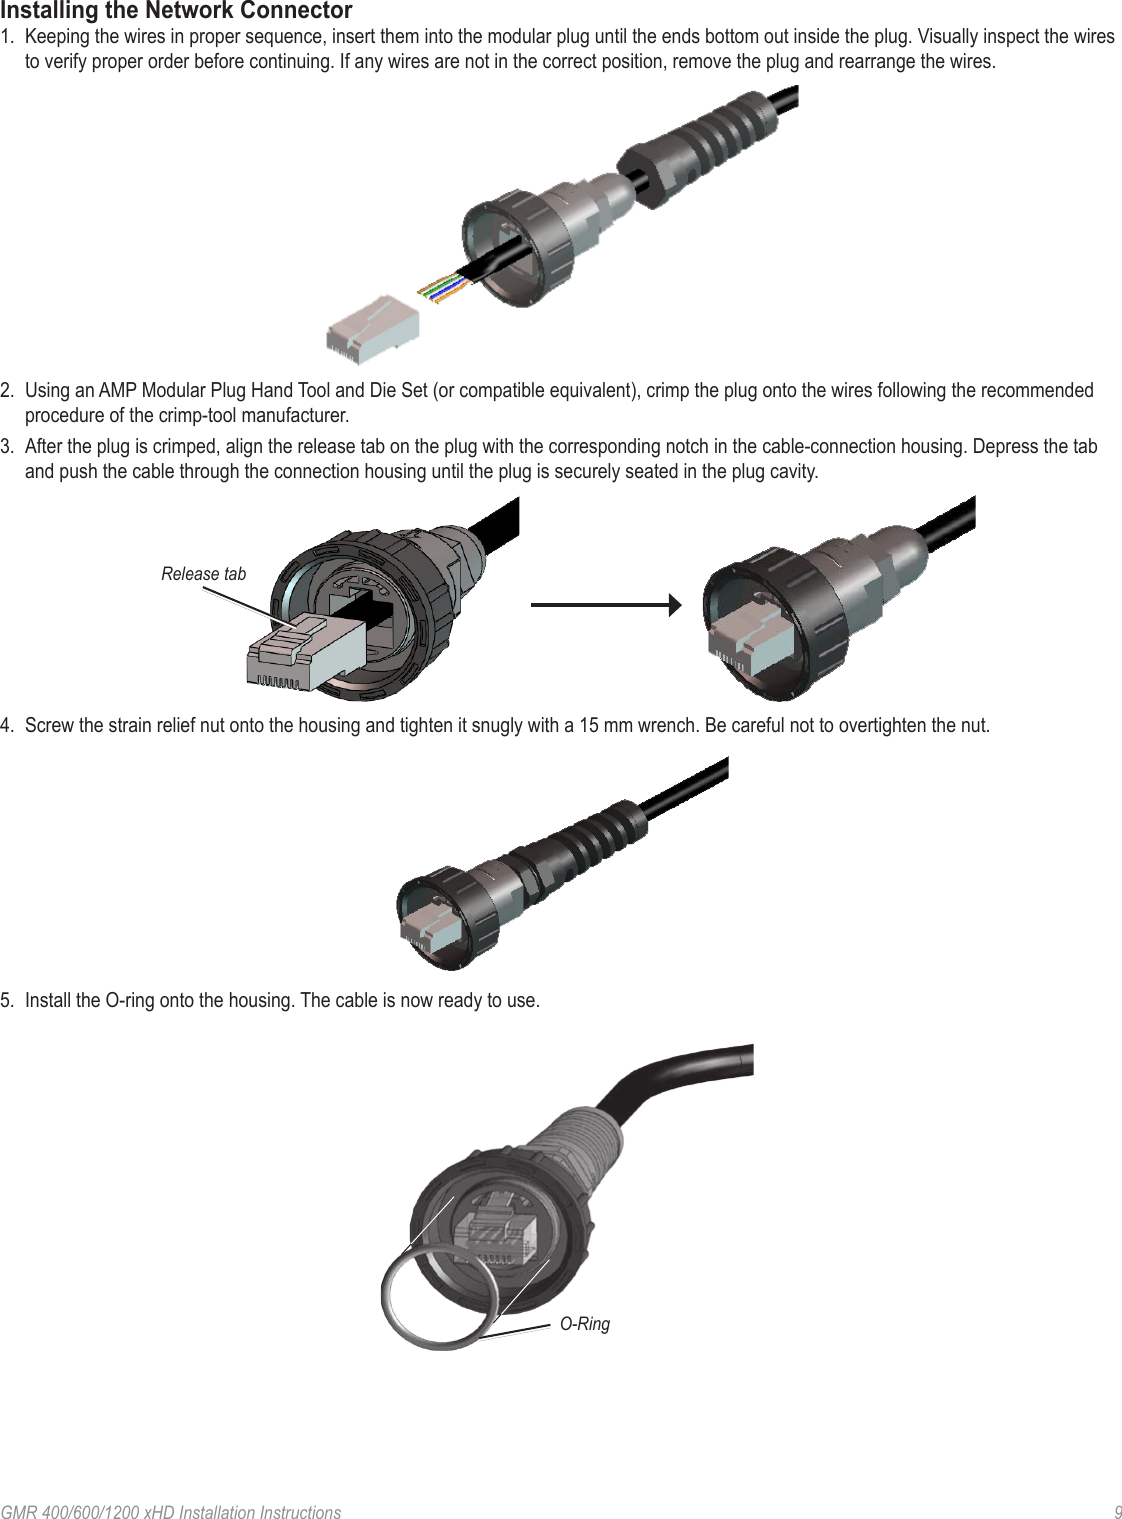 GMR 400/600/1200 xHD Installation Instructions   9Installing the Network Connector1.  Keeping the wires in proper sequence, insert them into the modular plug until the ends bottom out inside the plug. Visually inspect the wires to verify proper order before continuing. If any wires are not in the correct position, remove the plug and rearrange the wires.2.  Using an AMP Modular Plug Hand Tool and Die Set (or compatible equivalent), crimp the plug onto the wires following the recommended procedure of the crimp-tool manufacturer.3.  After the plug is crimped, align the release tab on the plug with the corresponding notch in the cable-connection housing. Depress the tab and push the cable through the connection housing until the plug is securely seated in the plug cavity.Release tab4.  Screw the strain relief nut onto the housing and tighten it snugly with a 15 mm wrench. Be careful not to overtighten the nut.5.  Install the O-ring onto the housing. The cable is now ready to use.O-Ring